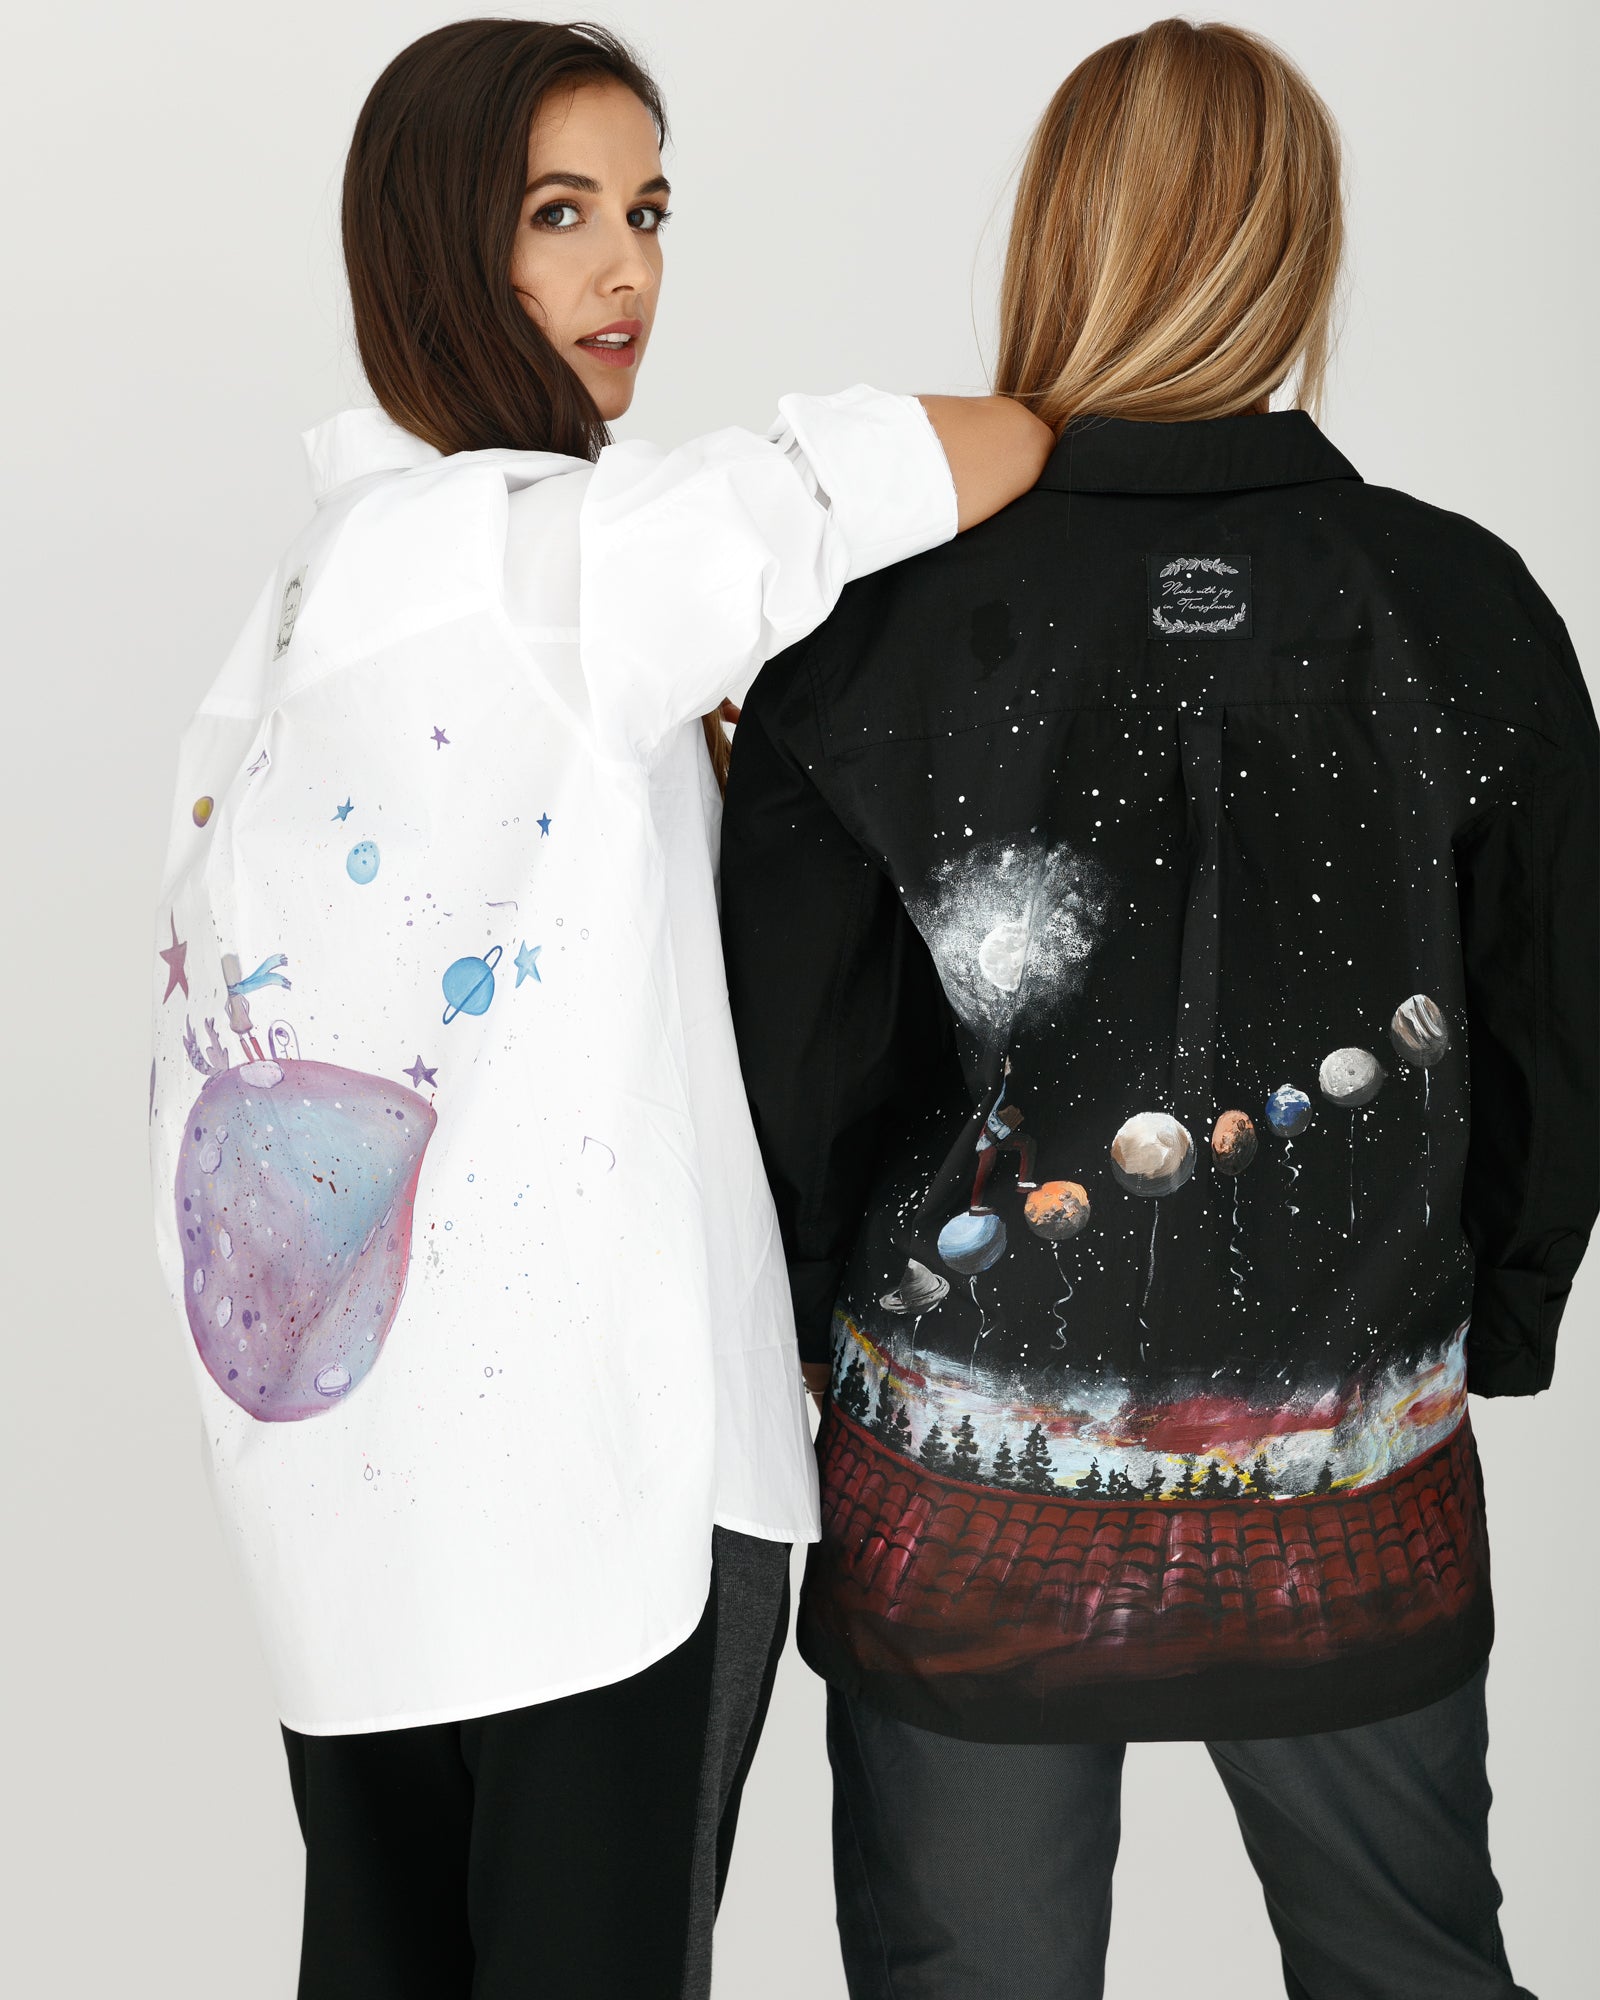 "Walking on the planet" hand painted women's shirt